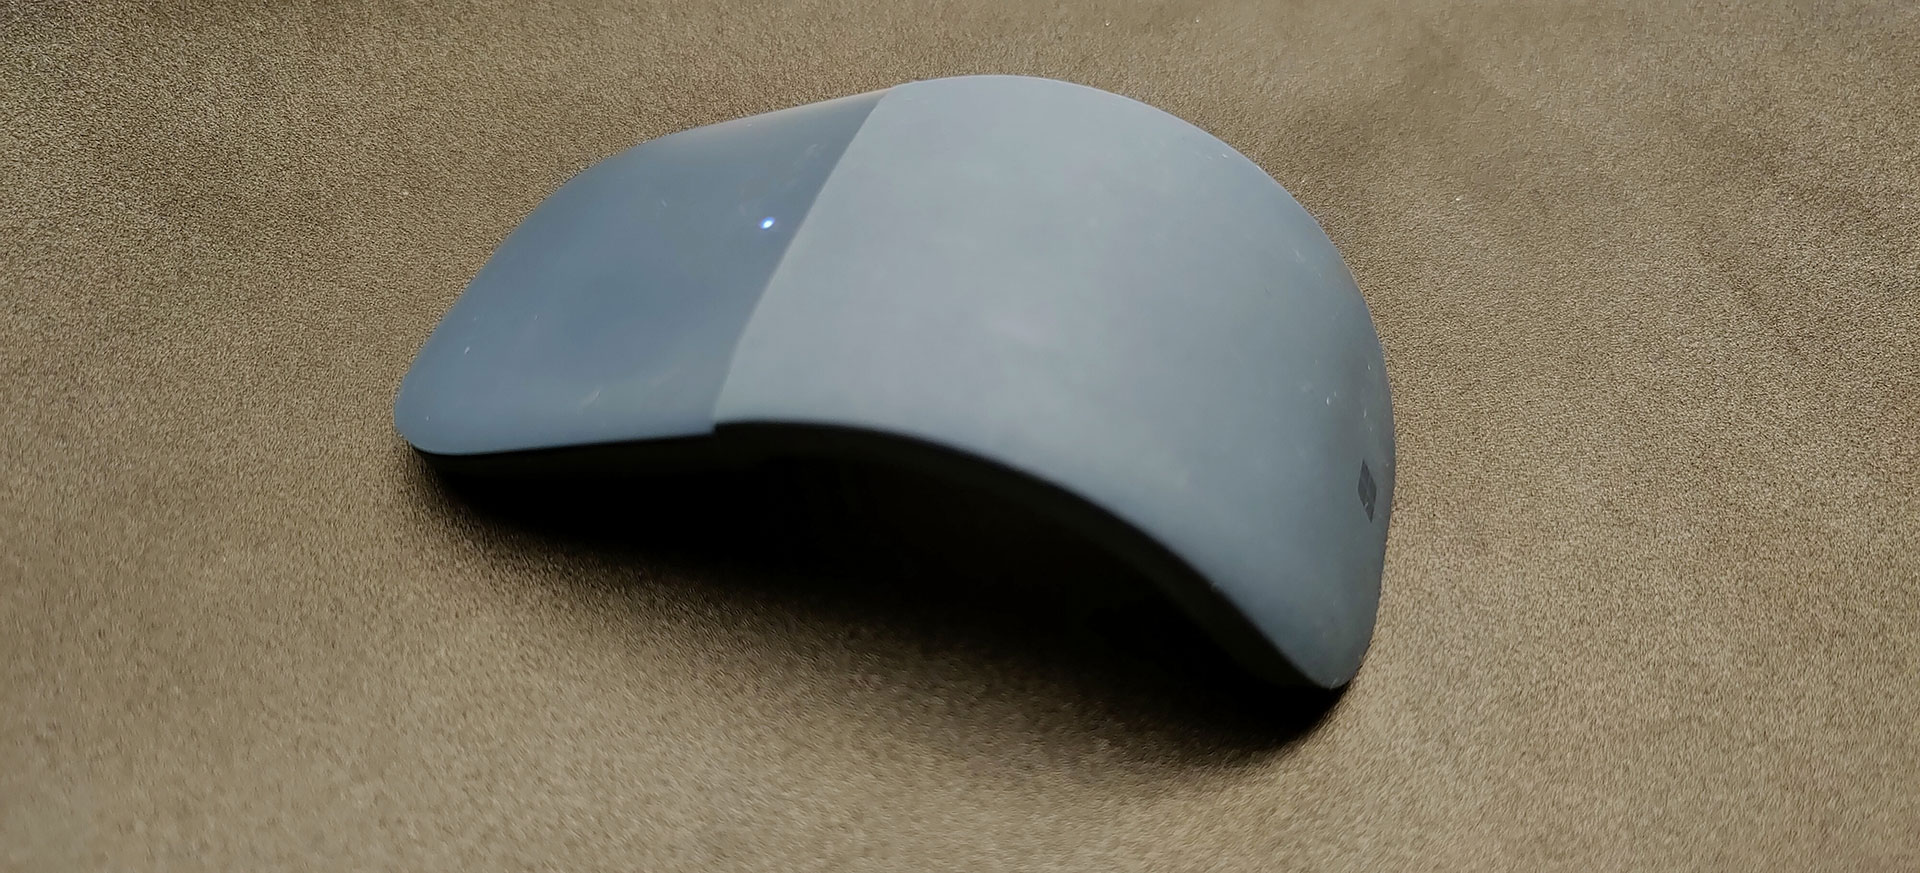 Microsoft Surface Arc Mouse aan